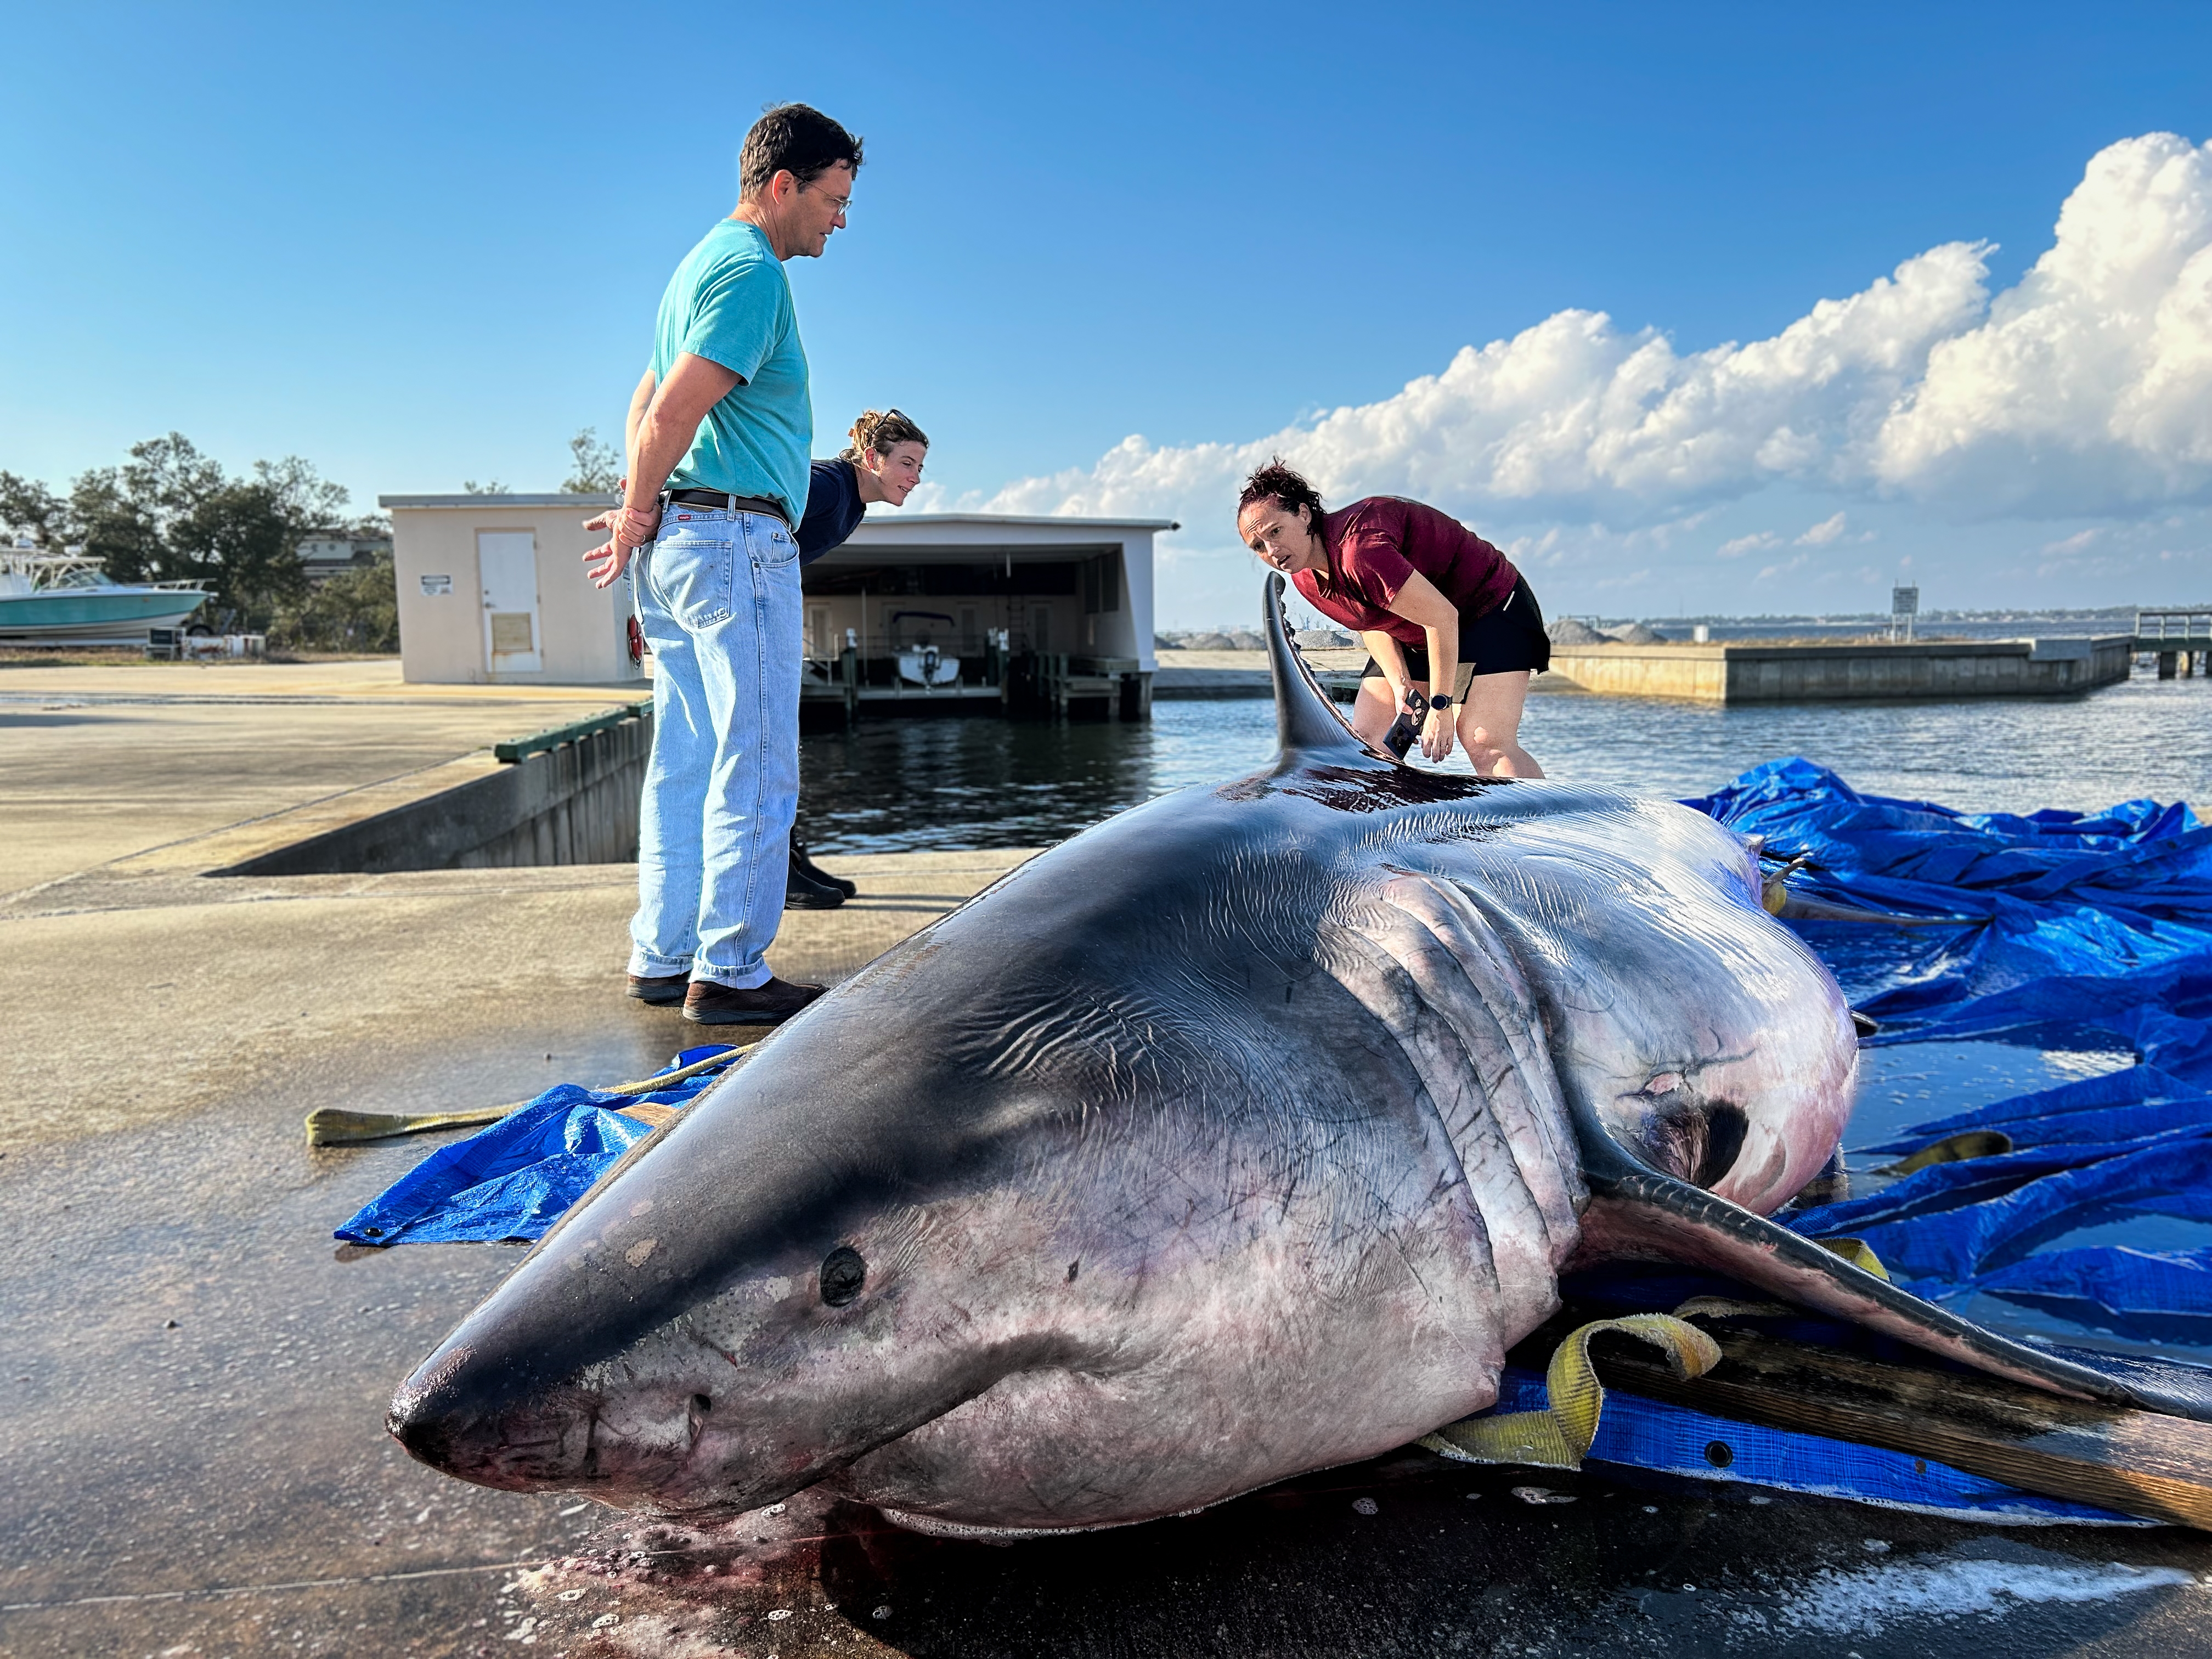 Image: Necropsy Offers Rare Opportunity to Study White Shark Biology